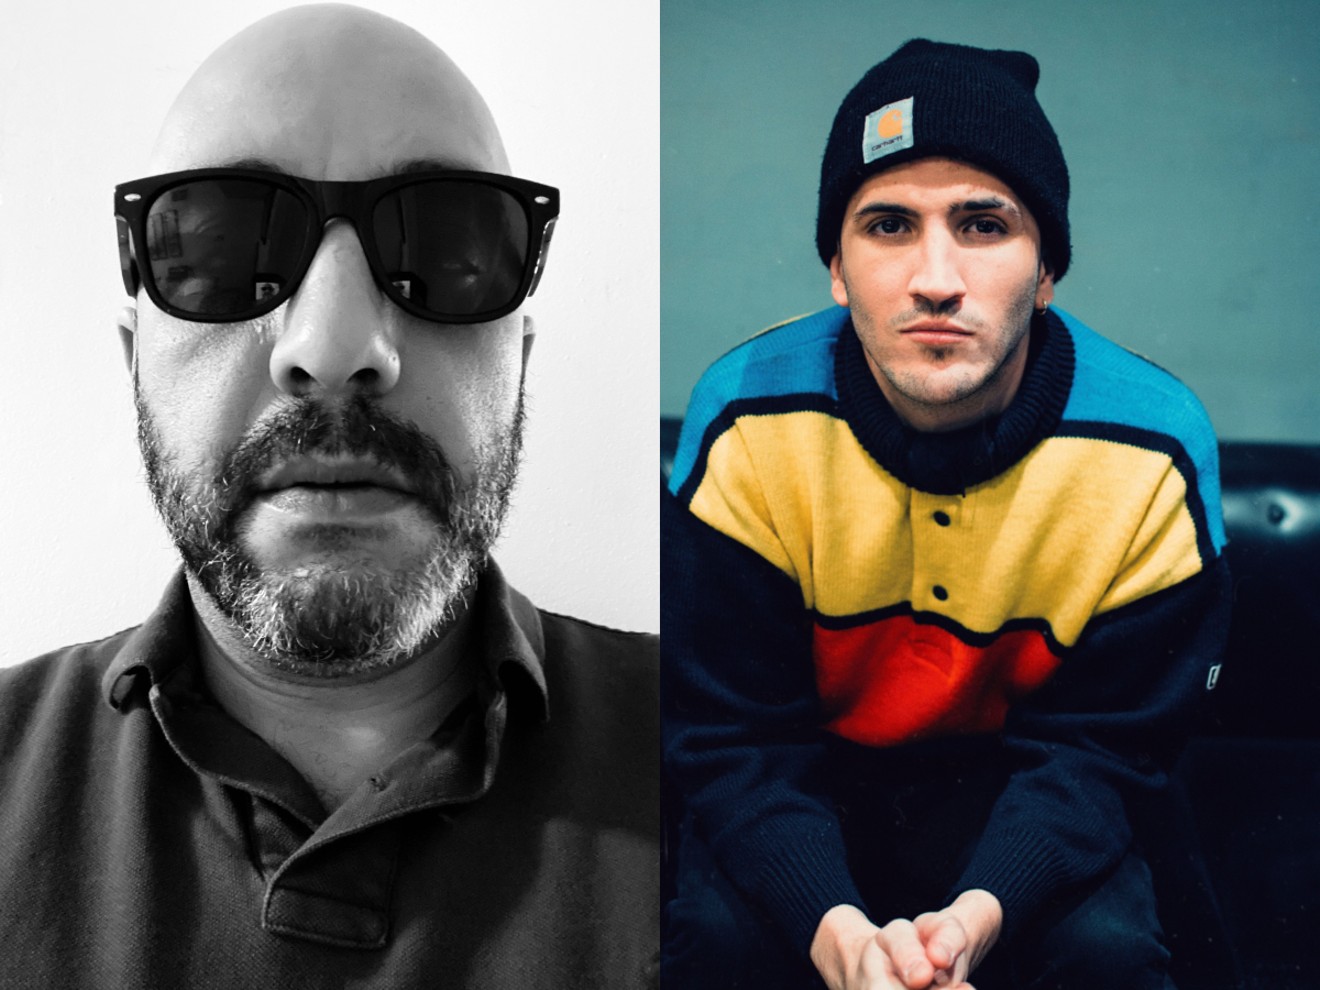 Push Button Objects (left) and Danny Daze